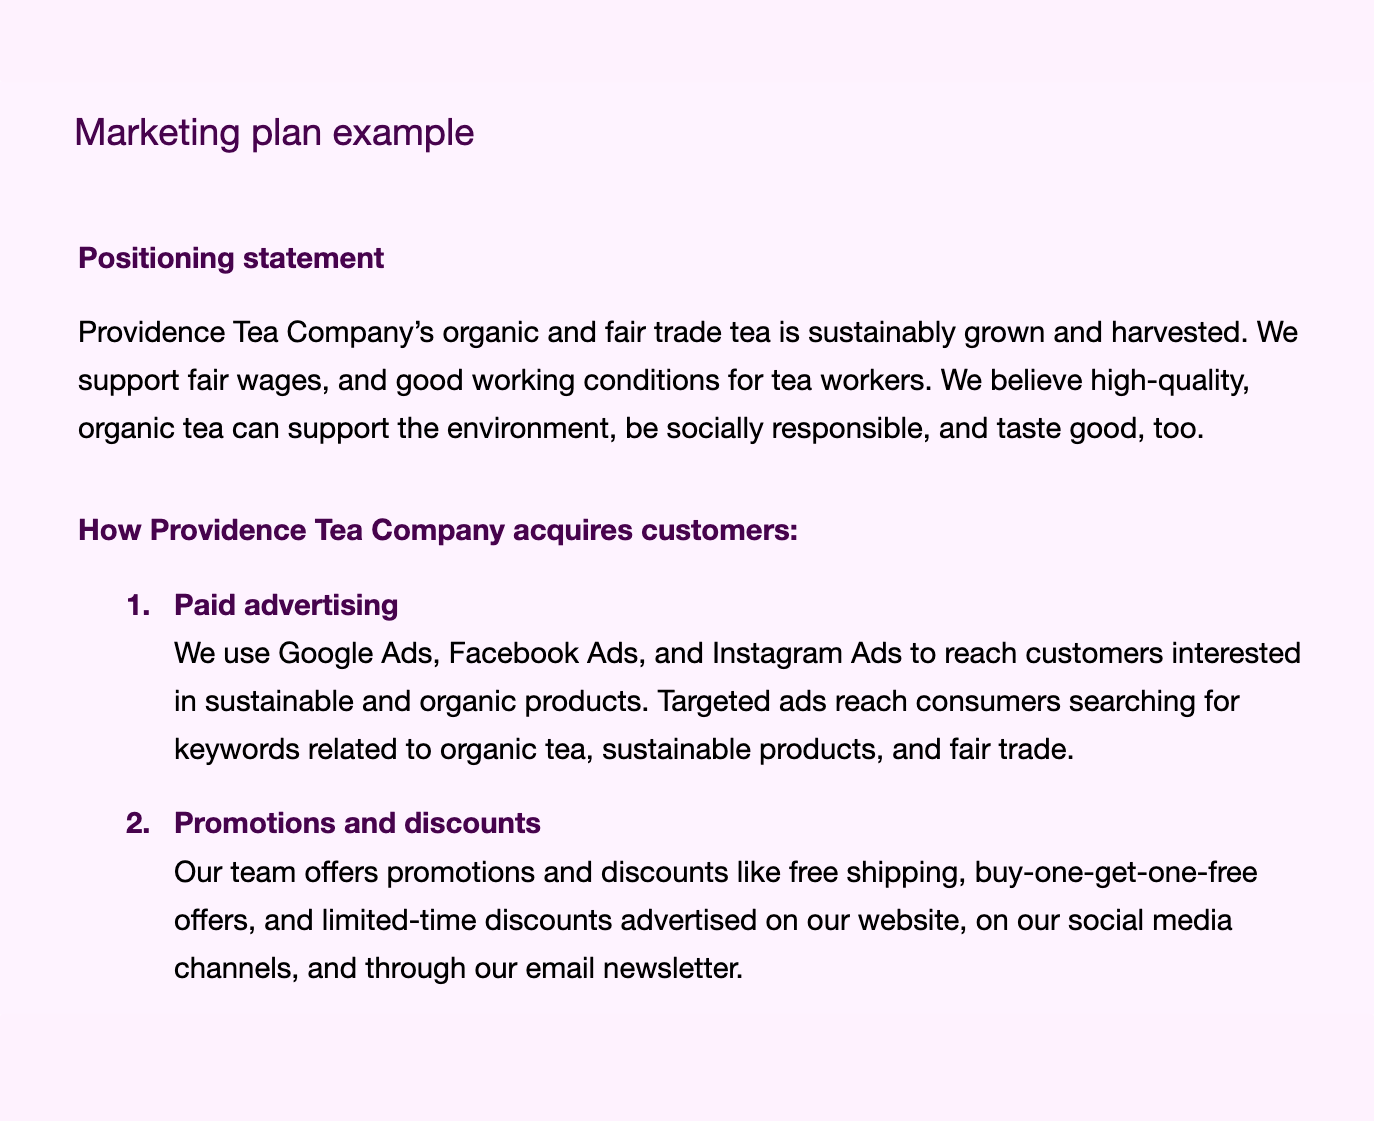 Example text in a business plan's marketing plan section